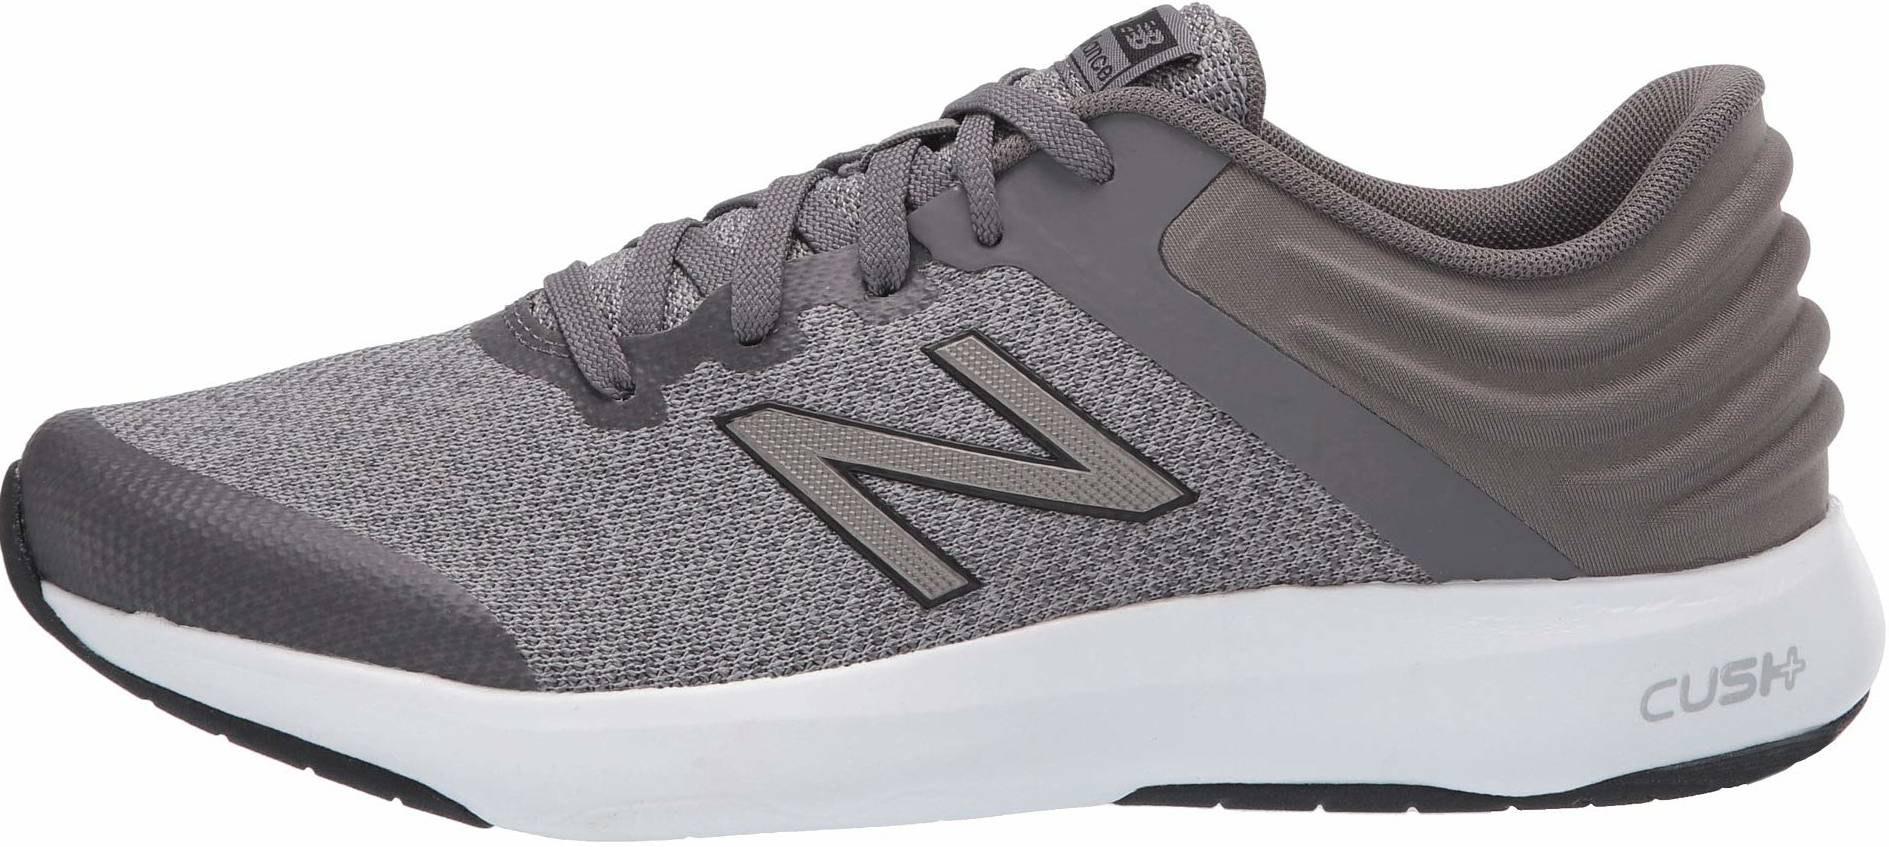 best new balance sneakers for walking